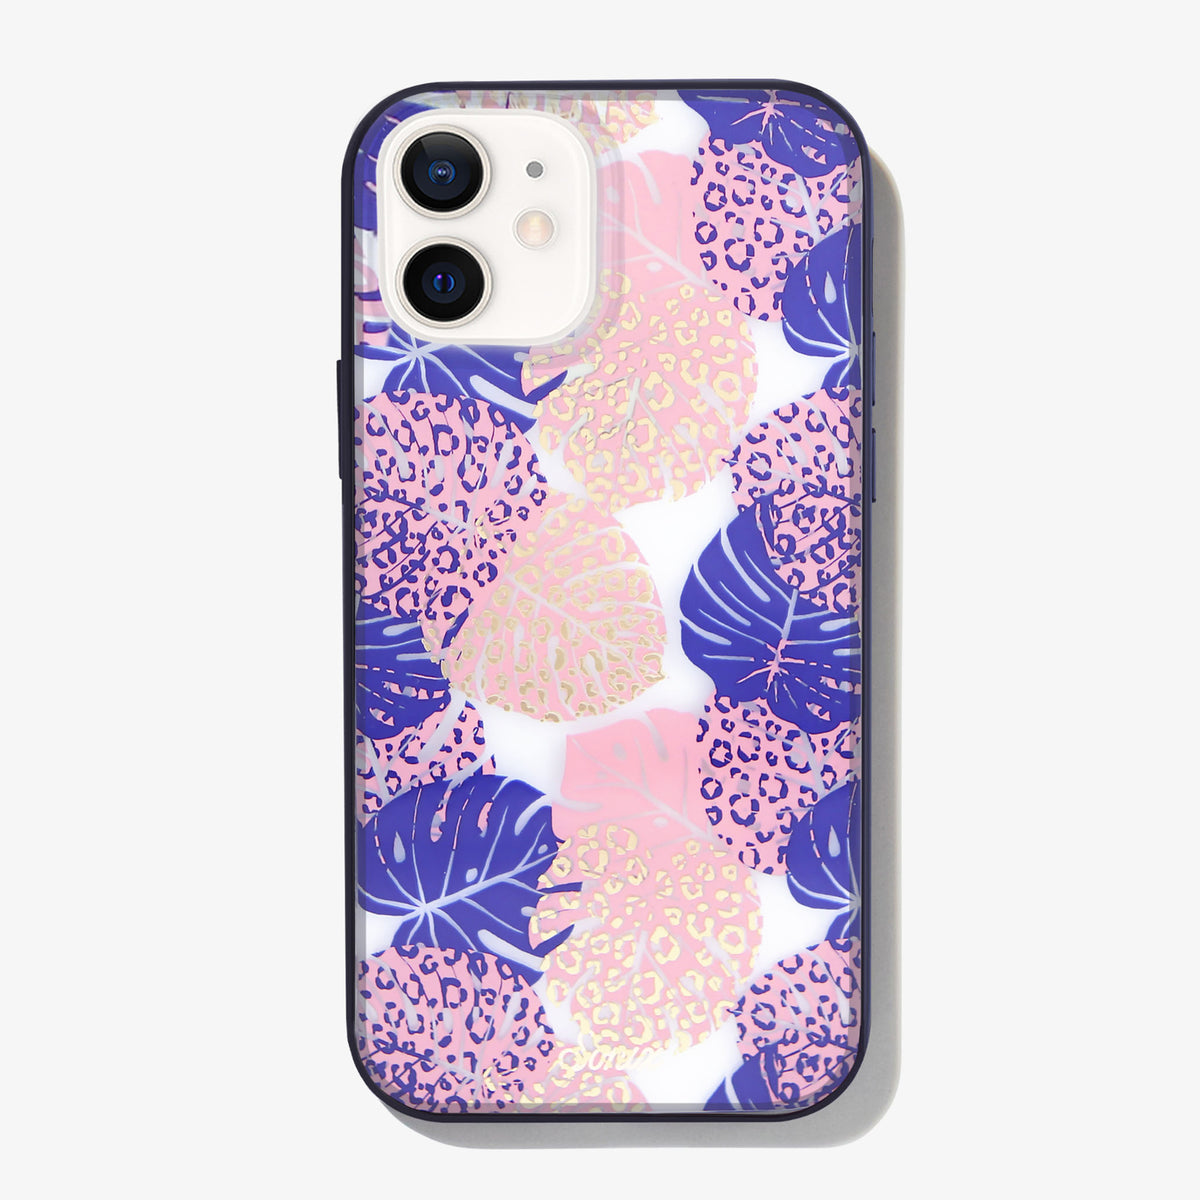 KATE SPADE FLORAL PURPLE iPhone 13 Pro Max Case Cover